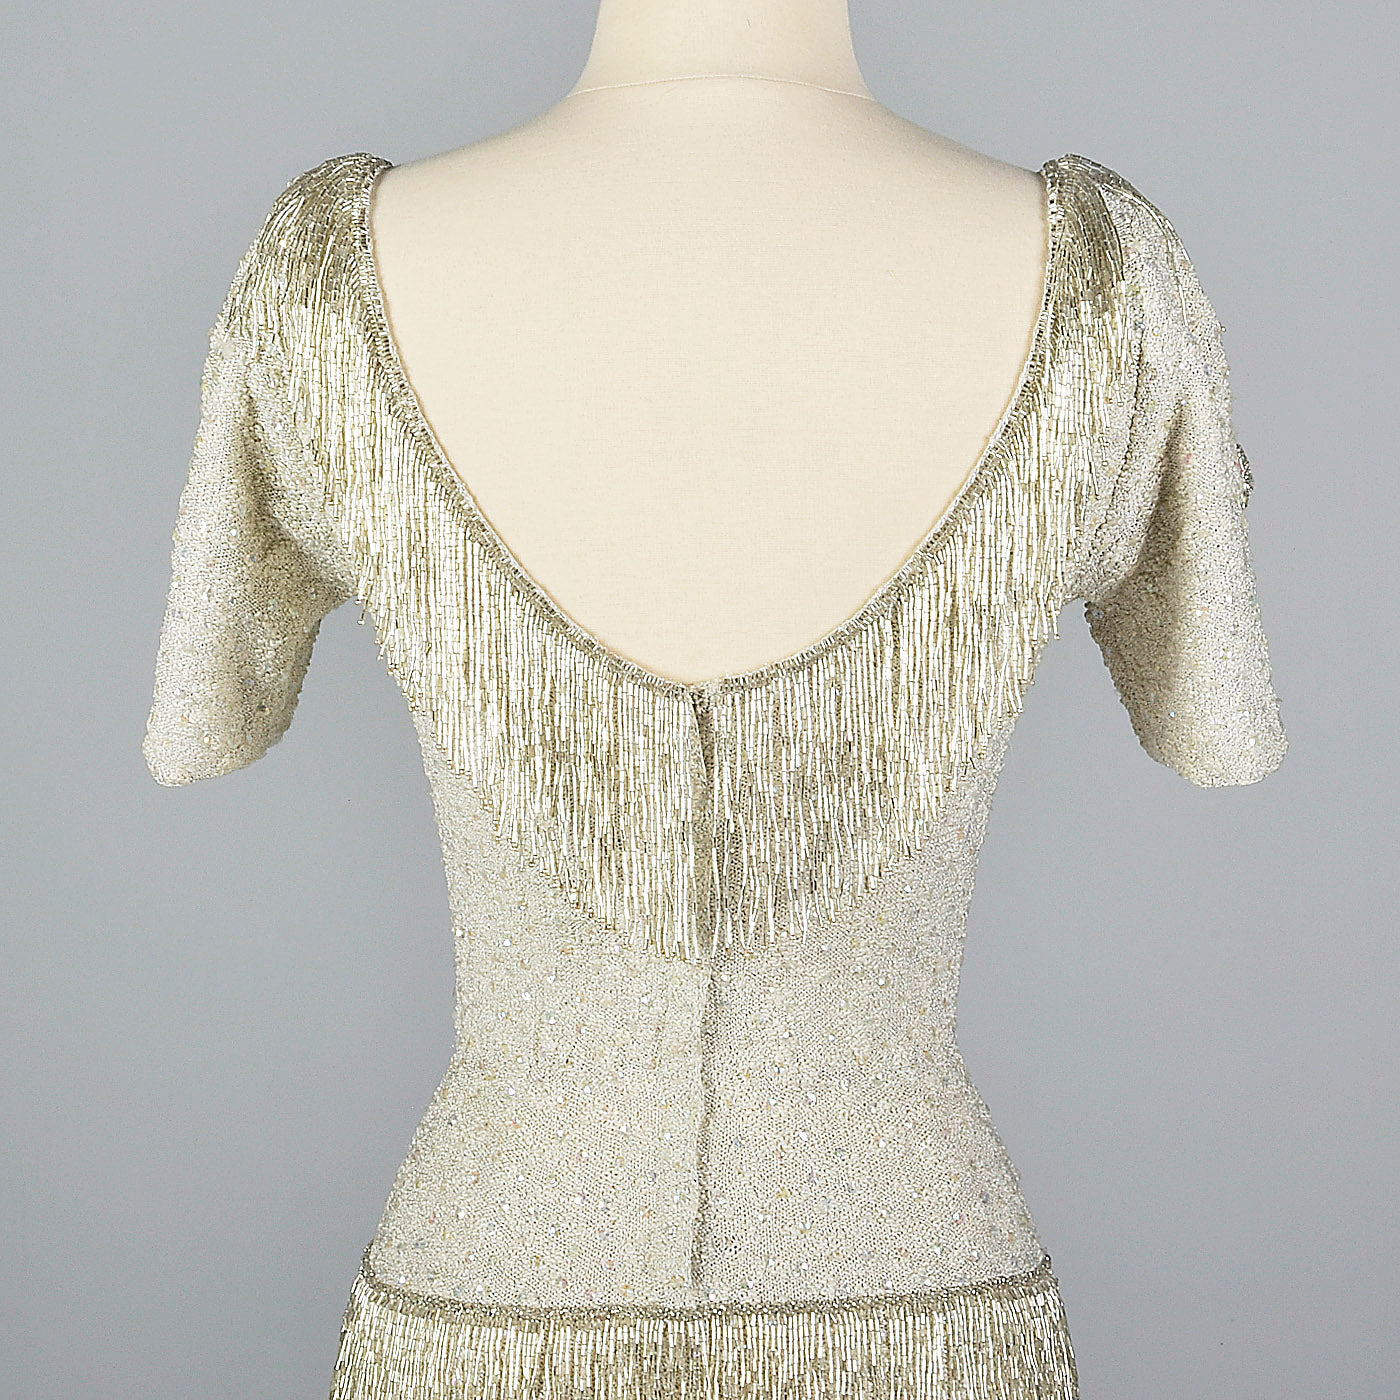 1960s Hand Knit Silver Beaded Dress with Fringe Detail